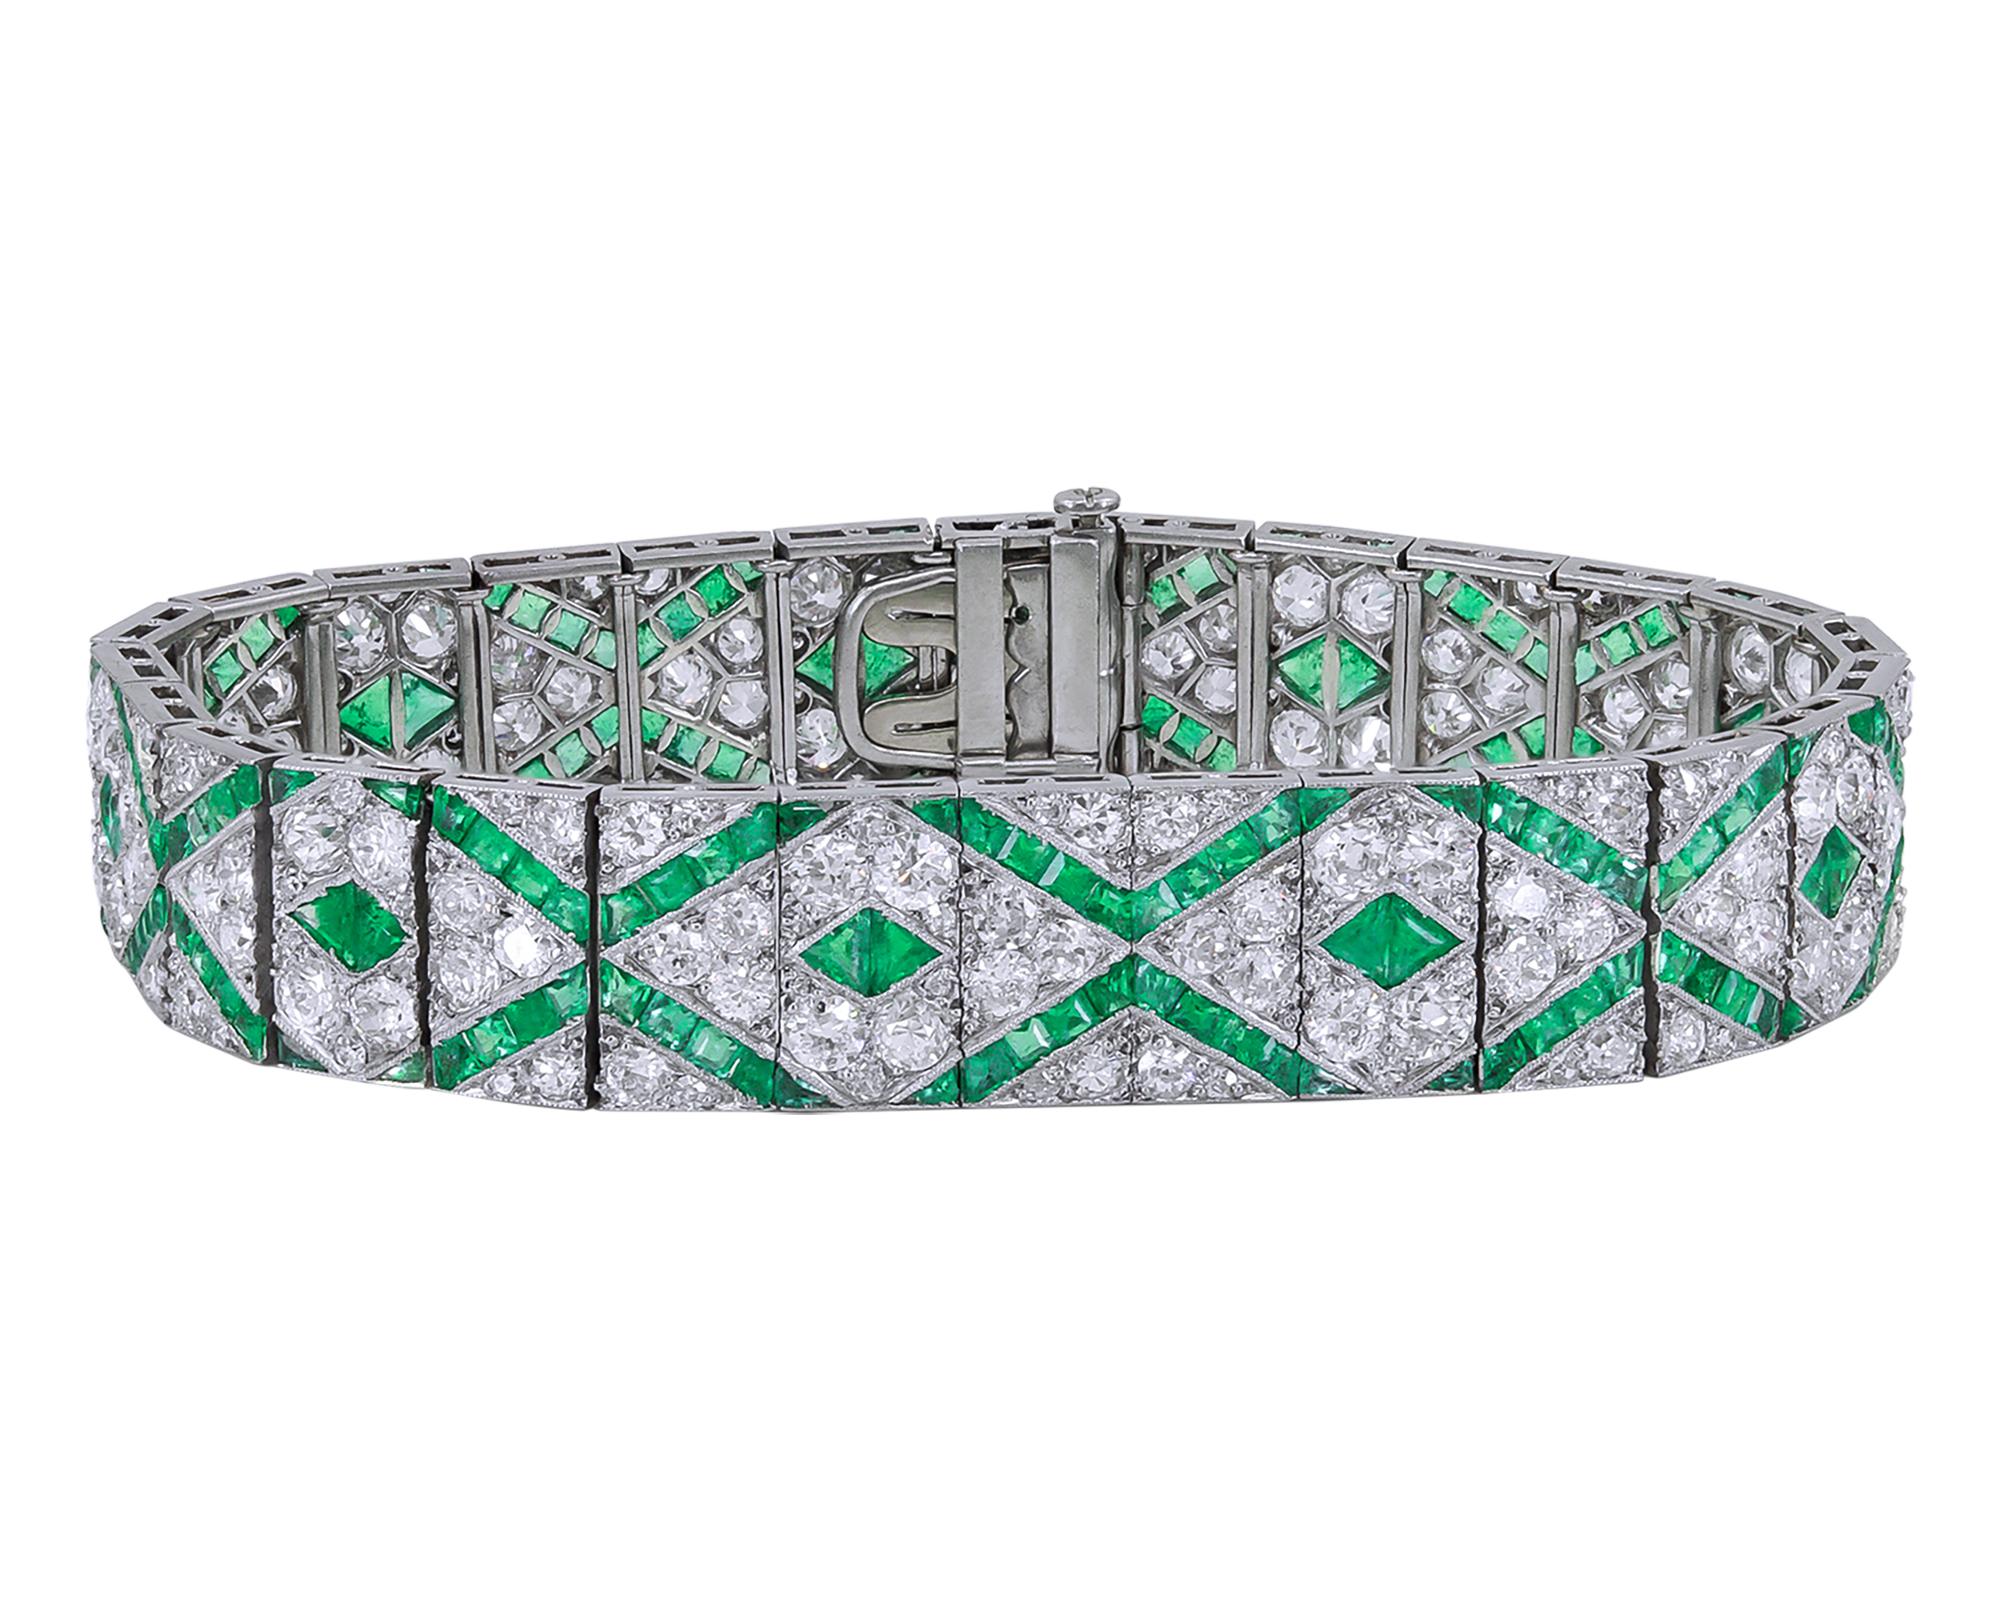 A gorgeous bracelet from the Art Deco period comprising of the emeralds and diamonds. French made.
The diamonds are old European cut weighing approximately 13.00 carats. 
The emeralds are mixed cut weighing approximately 5 carats. 
The metal is